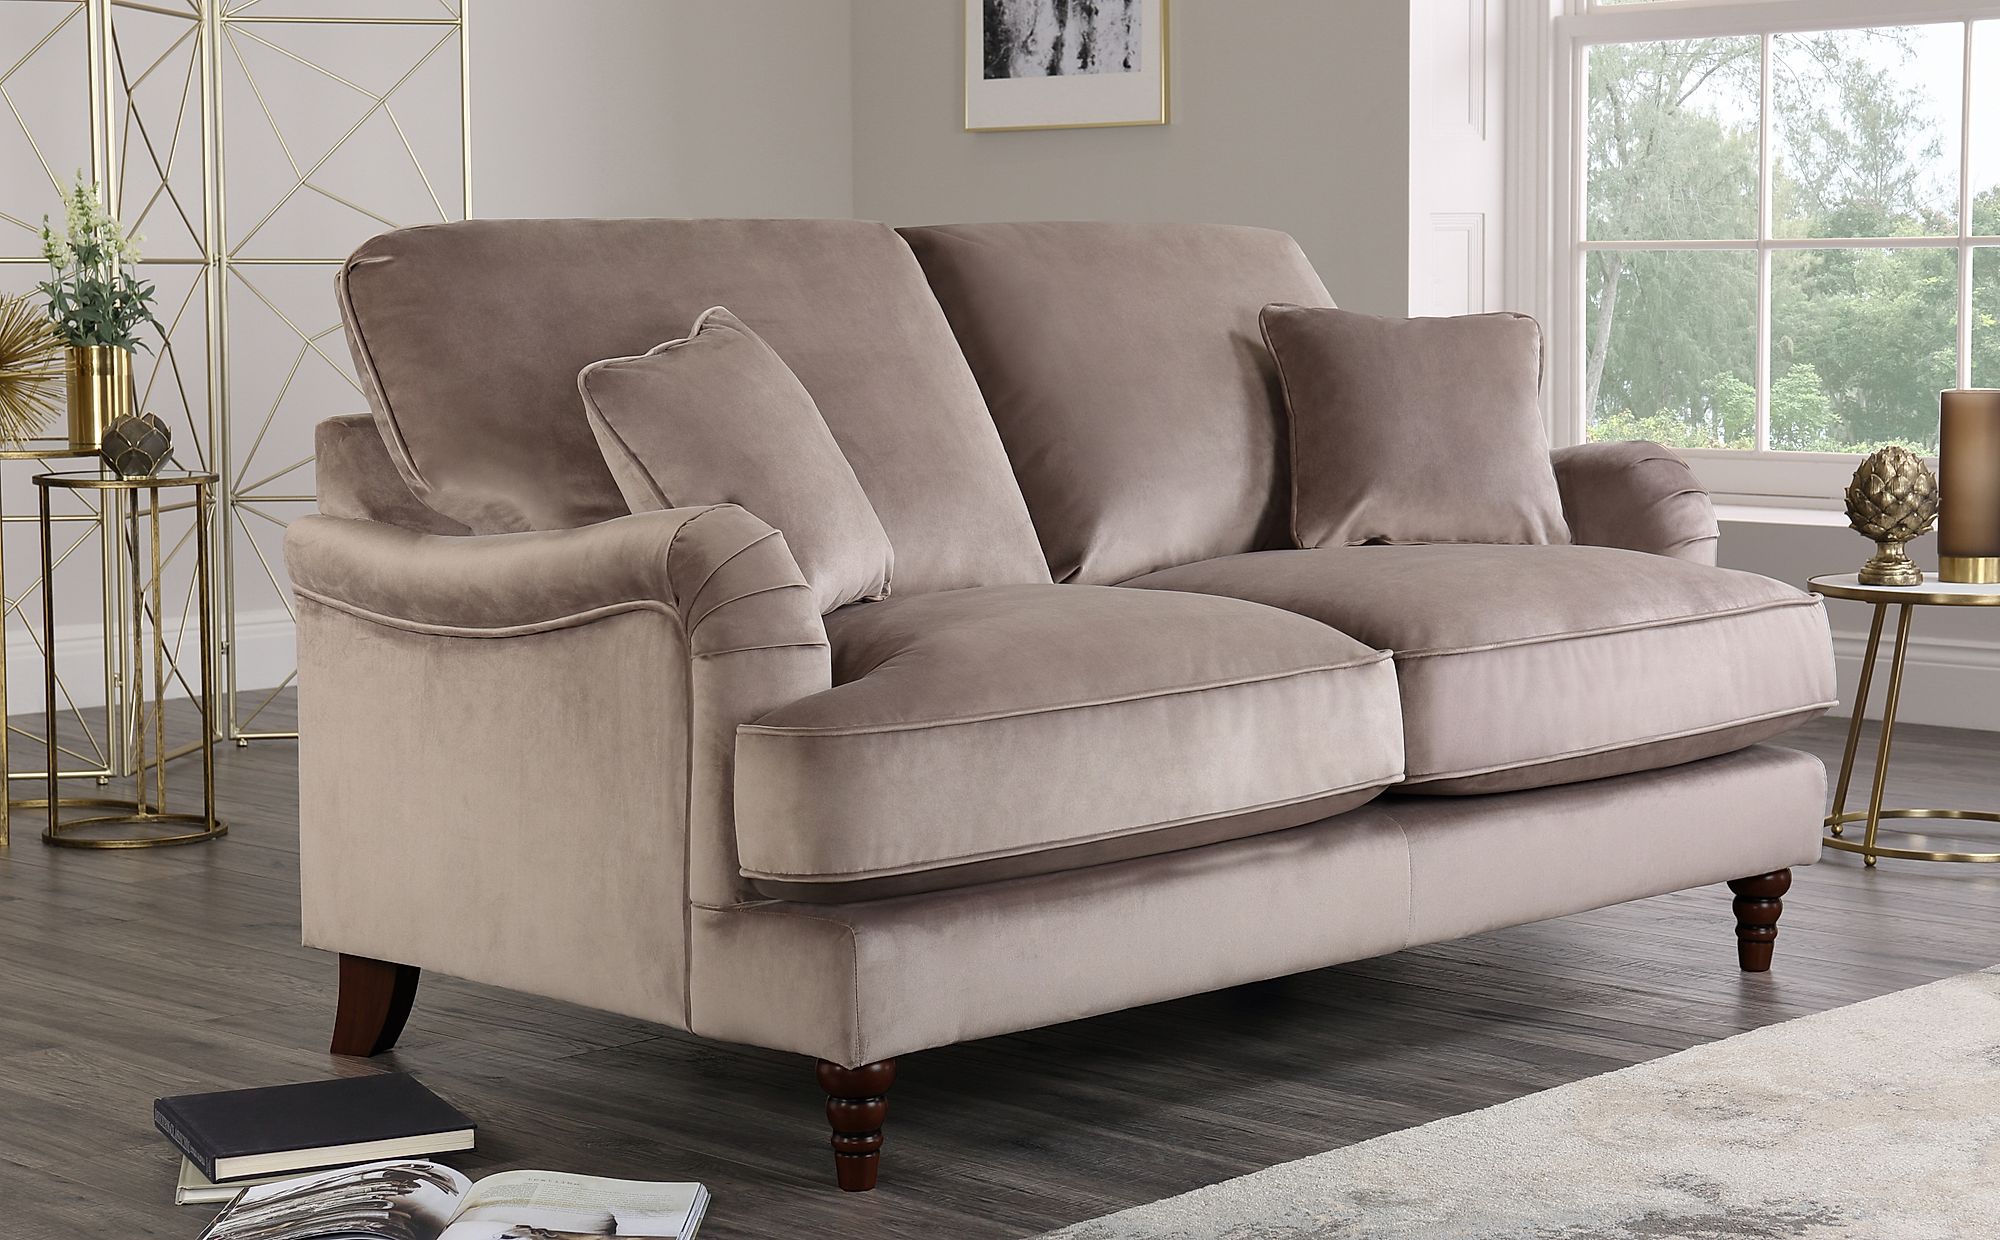 mink 2 seater sofa bed